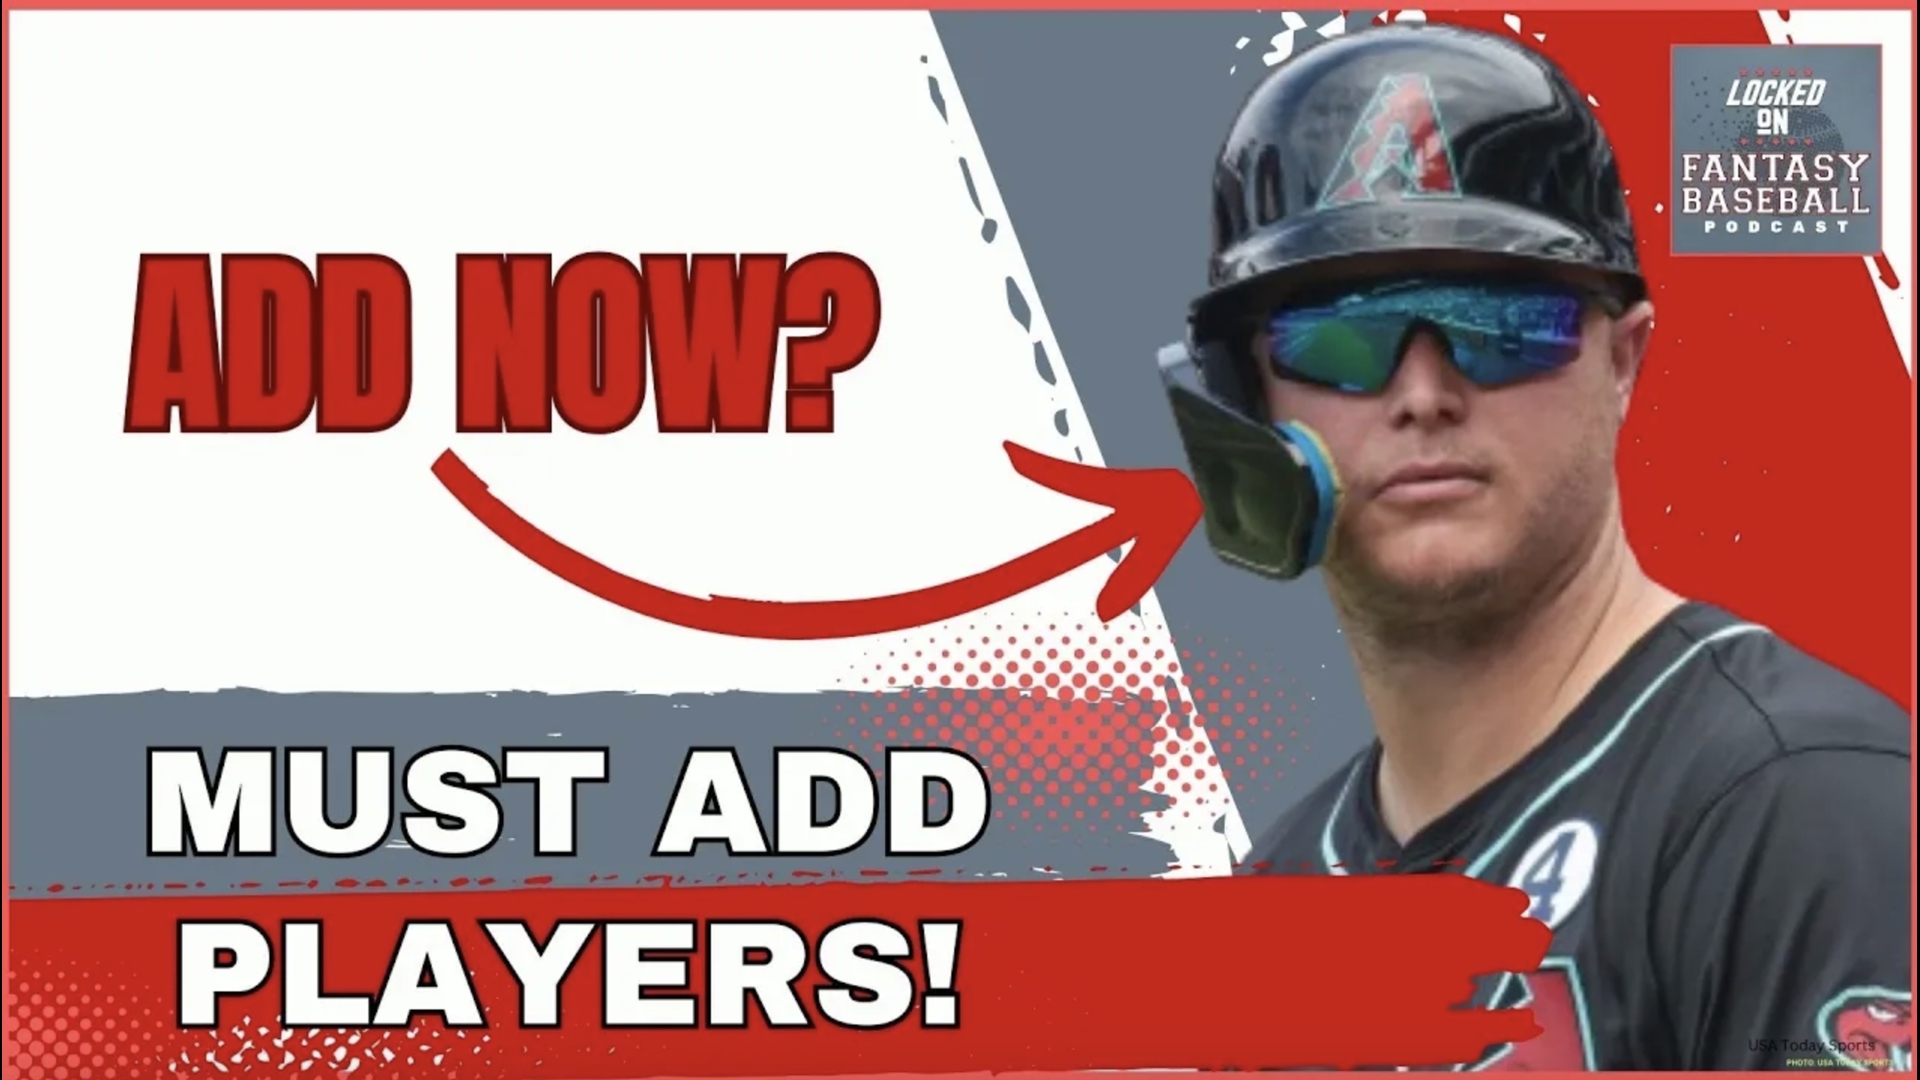 Need a boost for your fantasy baseball team this weekend? We've got you covered with must-add players, key strategies, and expert advice to secure your win!